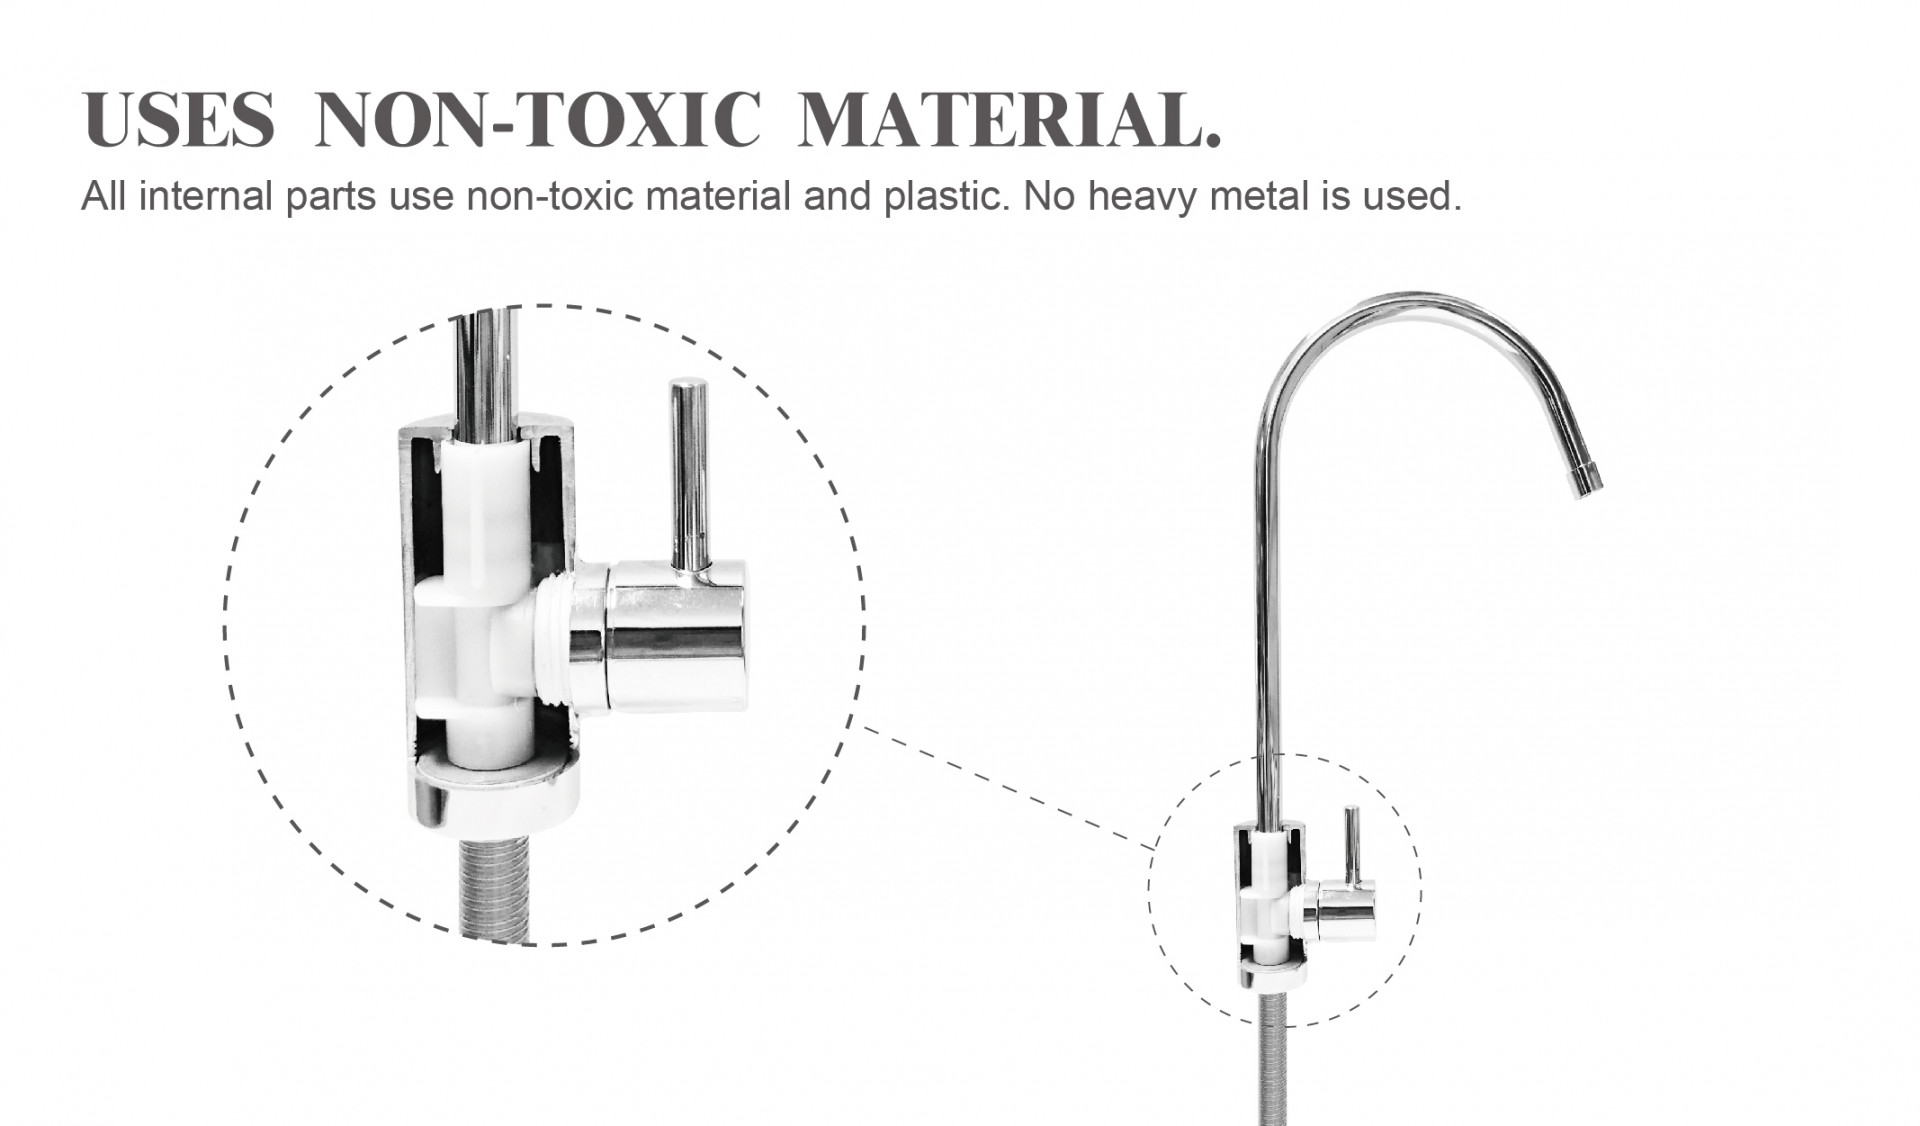 FAUCET USES NON-TOXIC MATERIAL